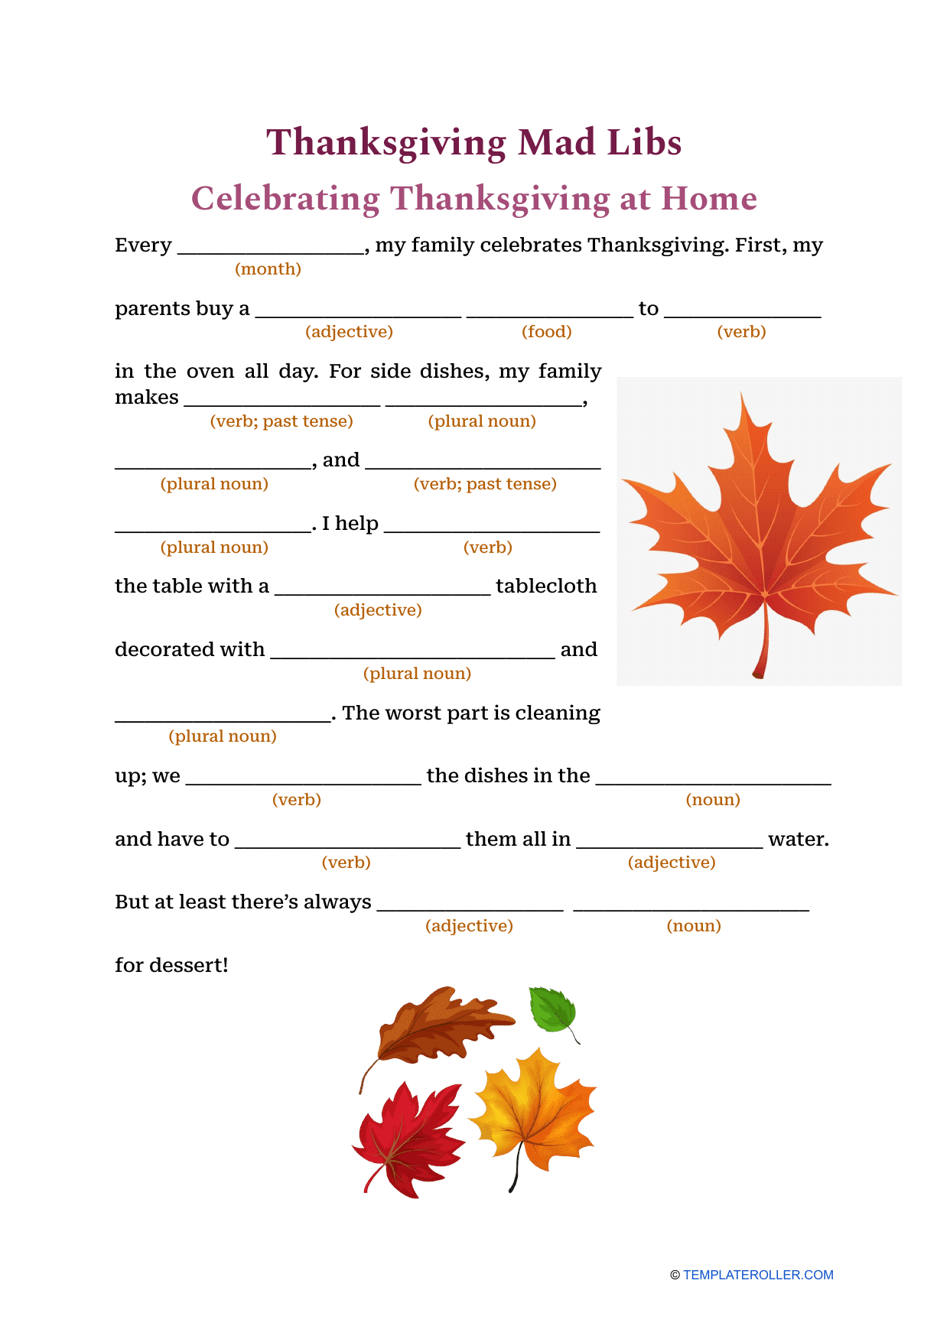 Thanksgiving Mad Libs - Celebrating Thanksgiving at Home Cover Image Preview